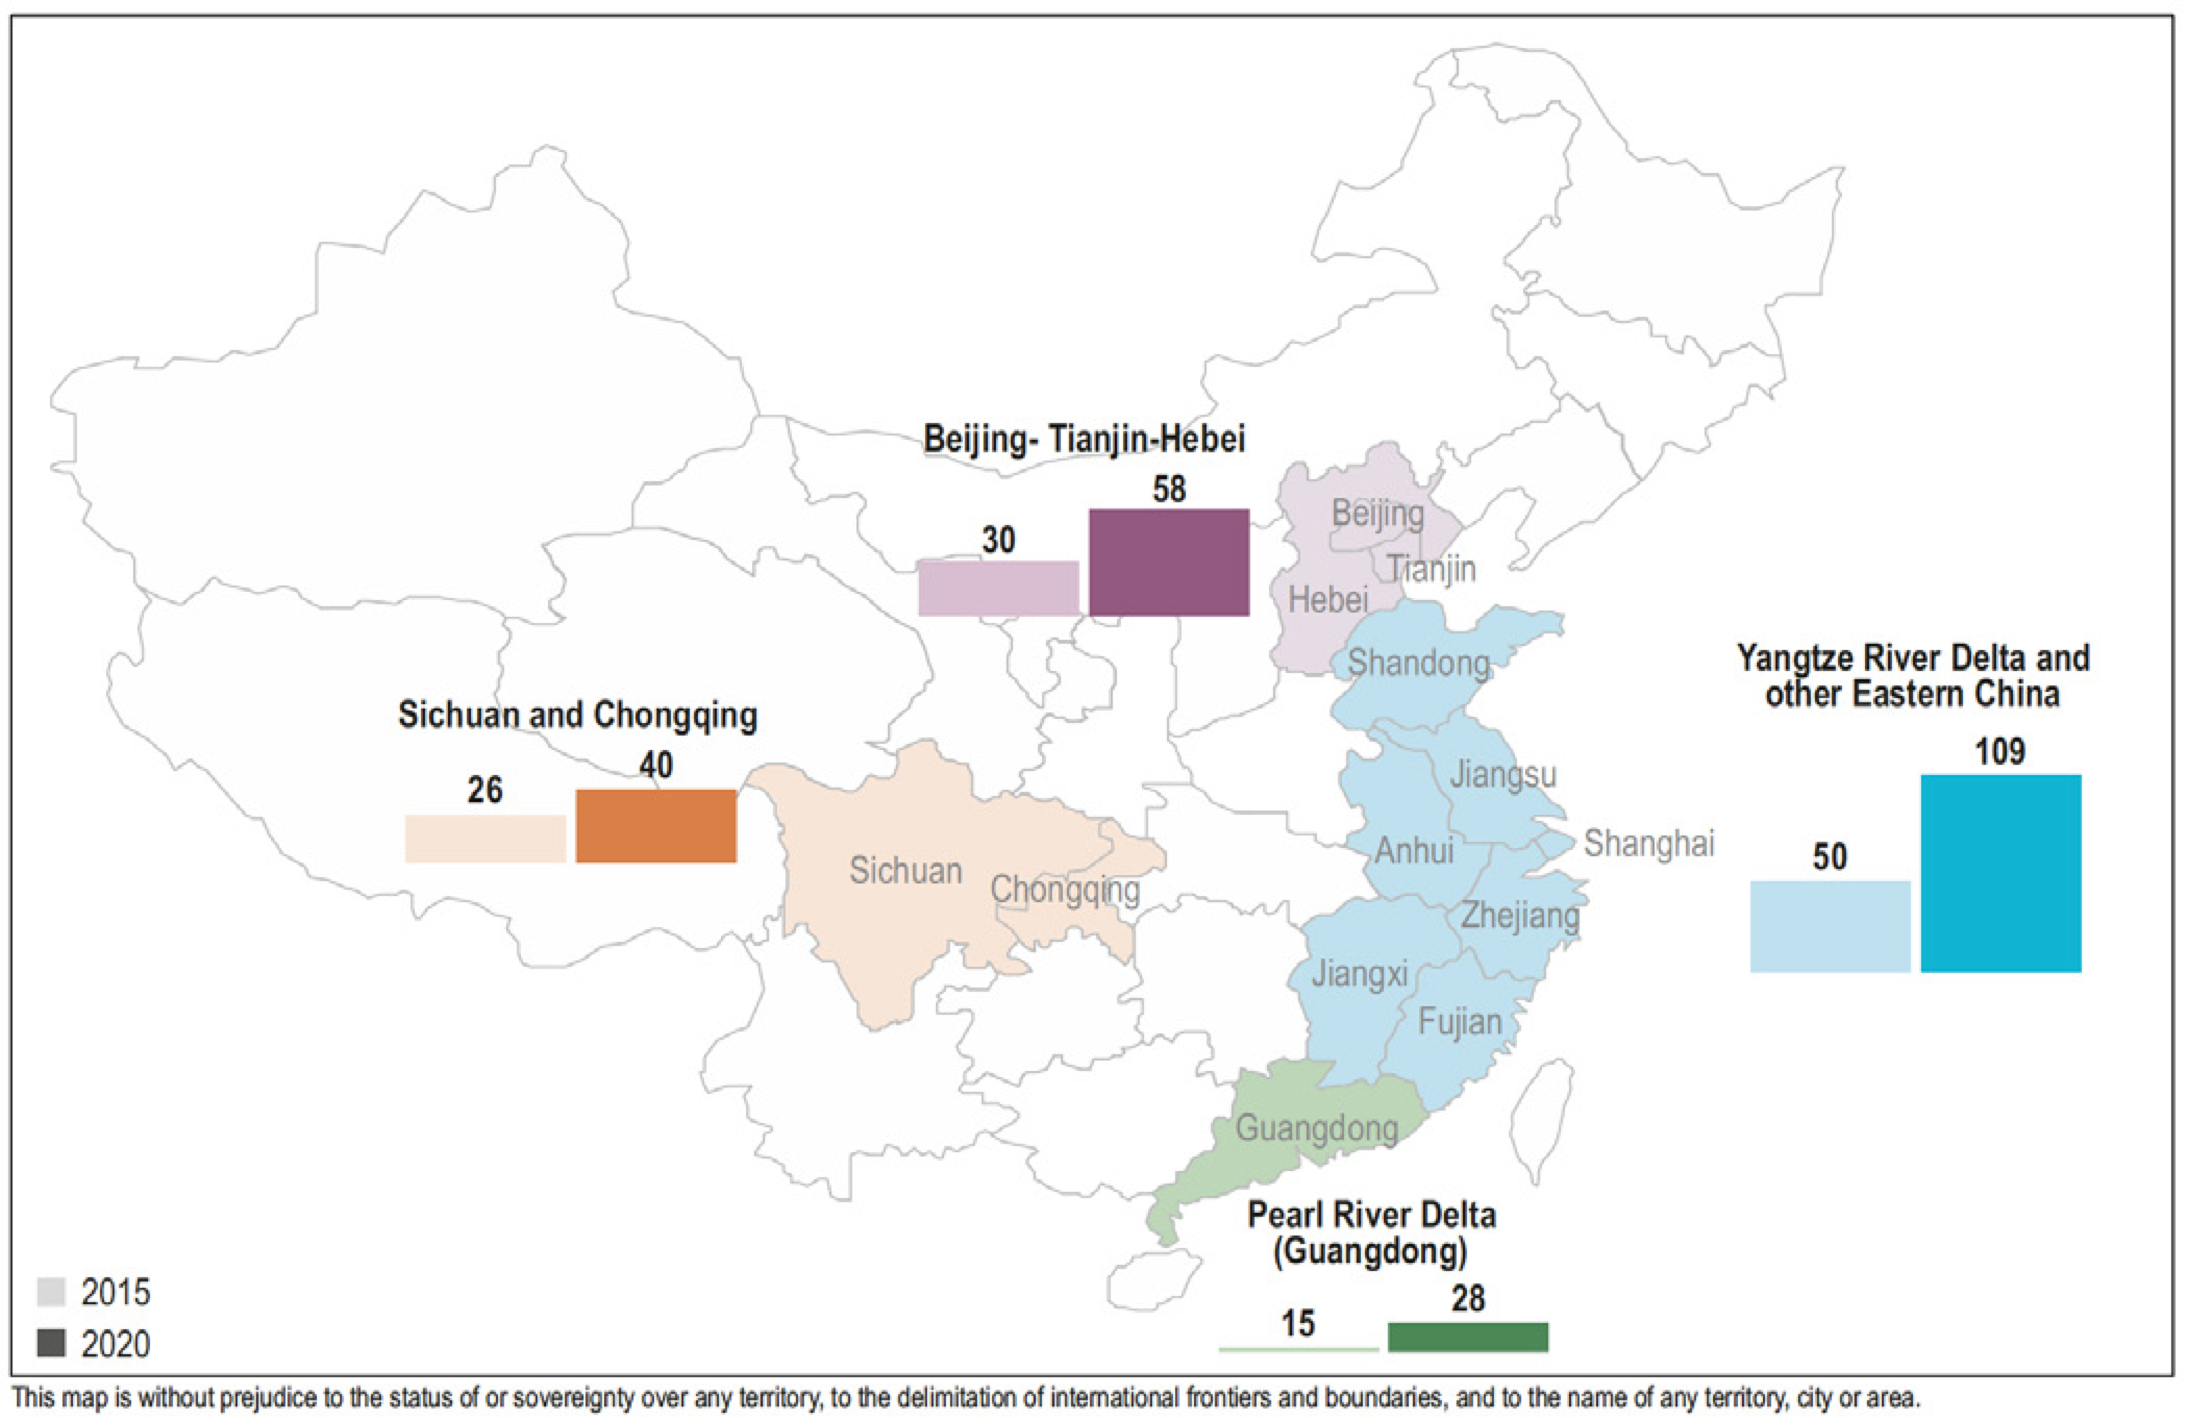 Planned gas consumption development in China’s key regions, 2015 and 2020 (bcm) - Credit: IEA’s Gas 2017 report